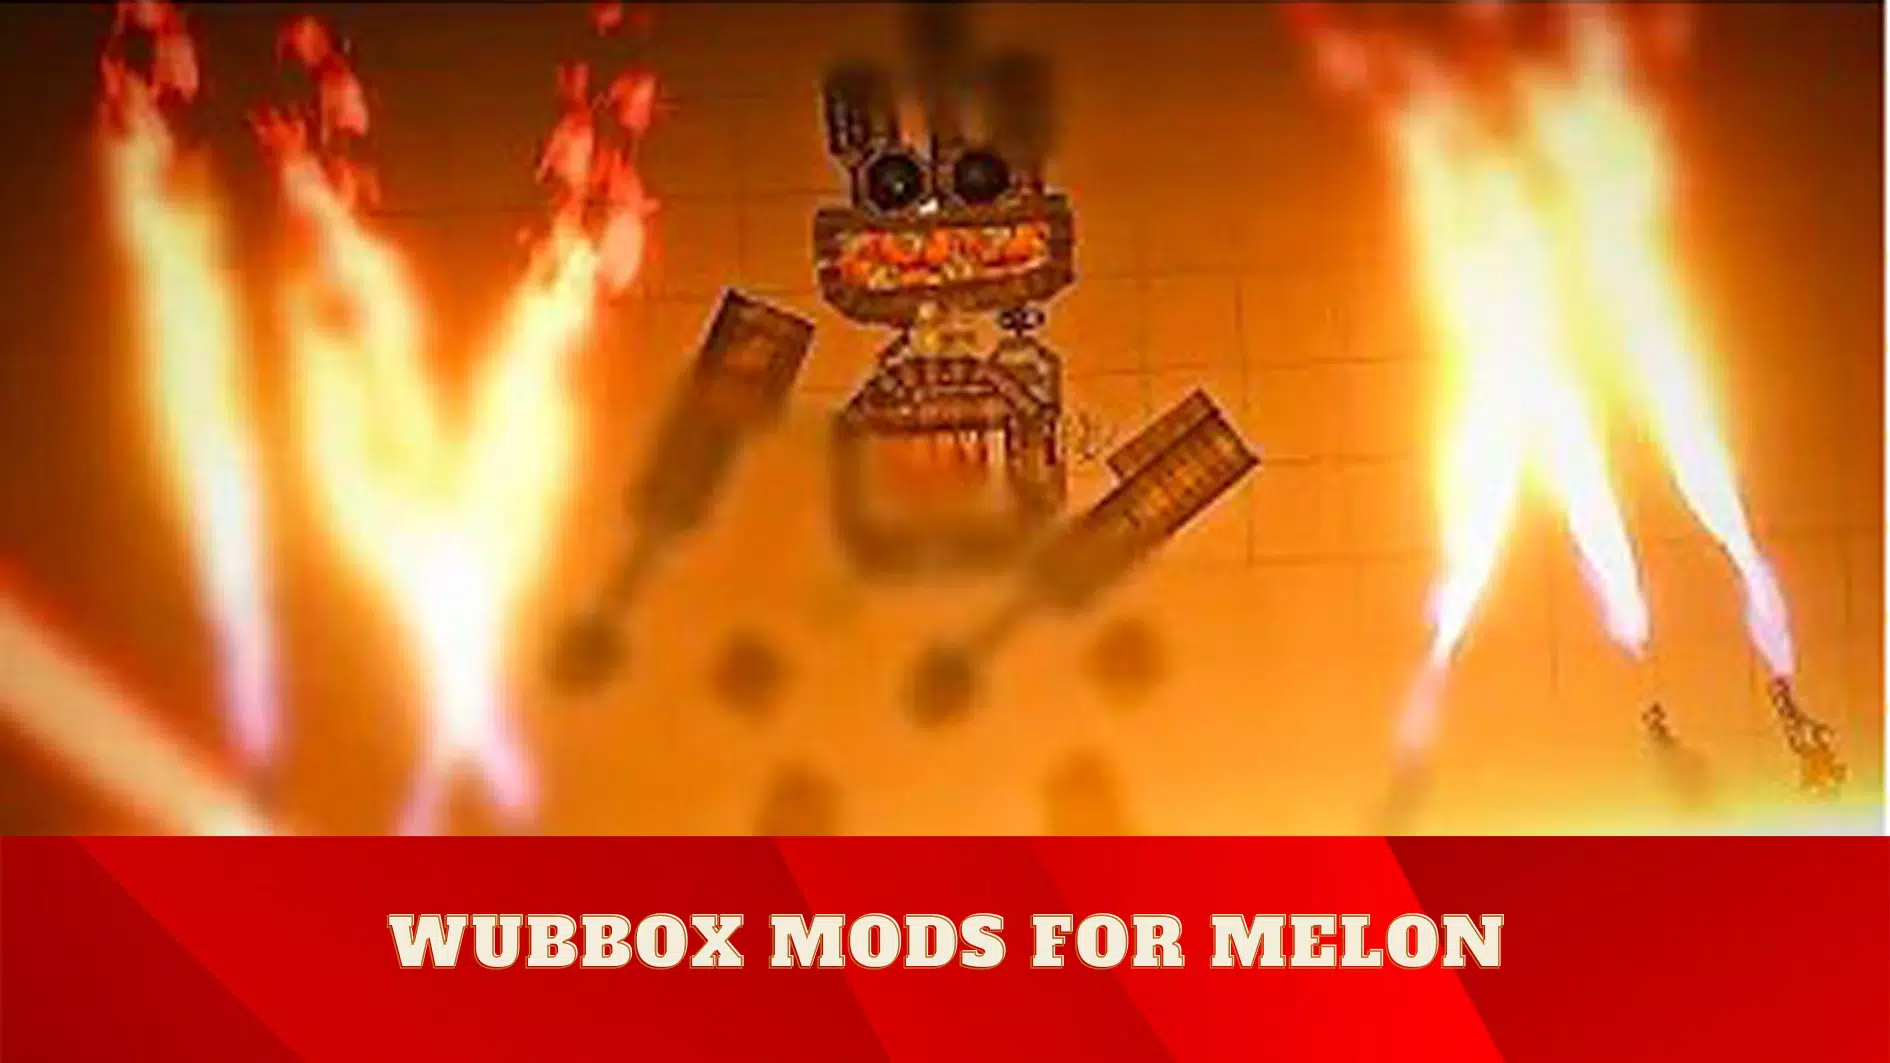 Wubbox for Melon Playground - Apps on Google Play